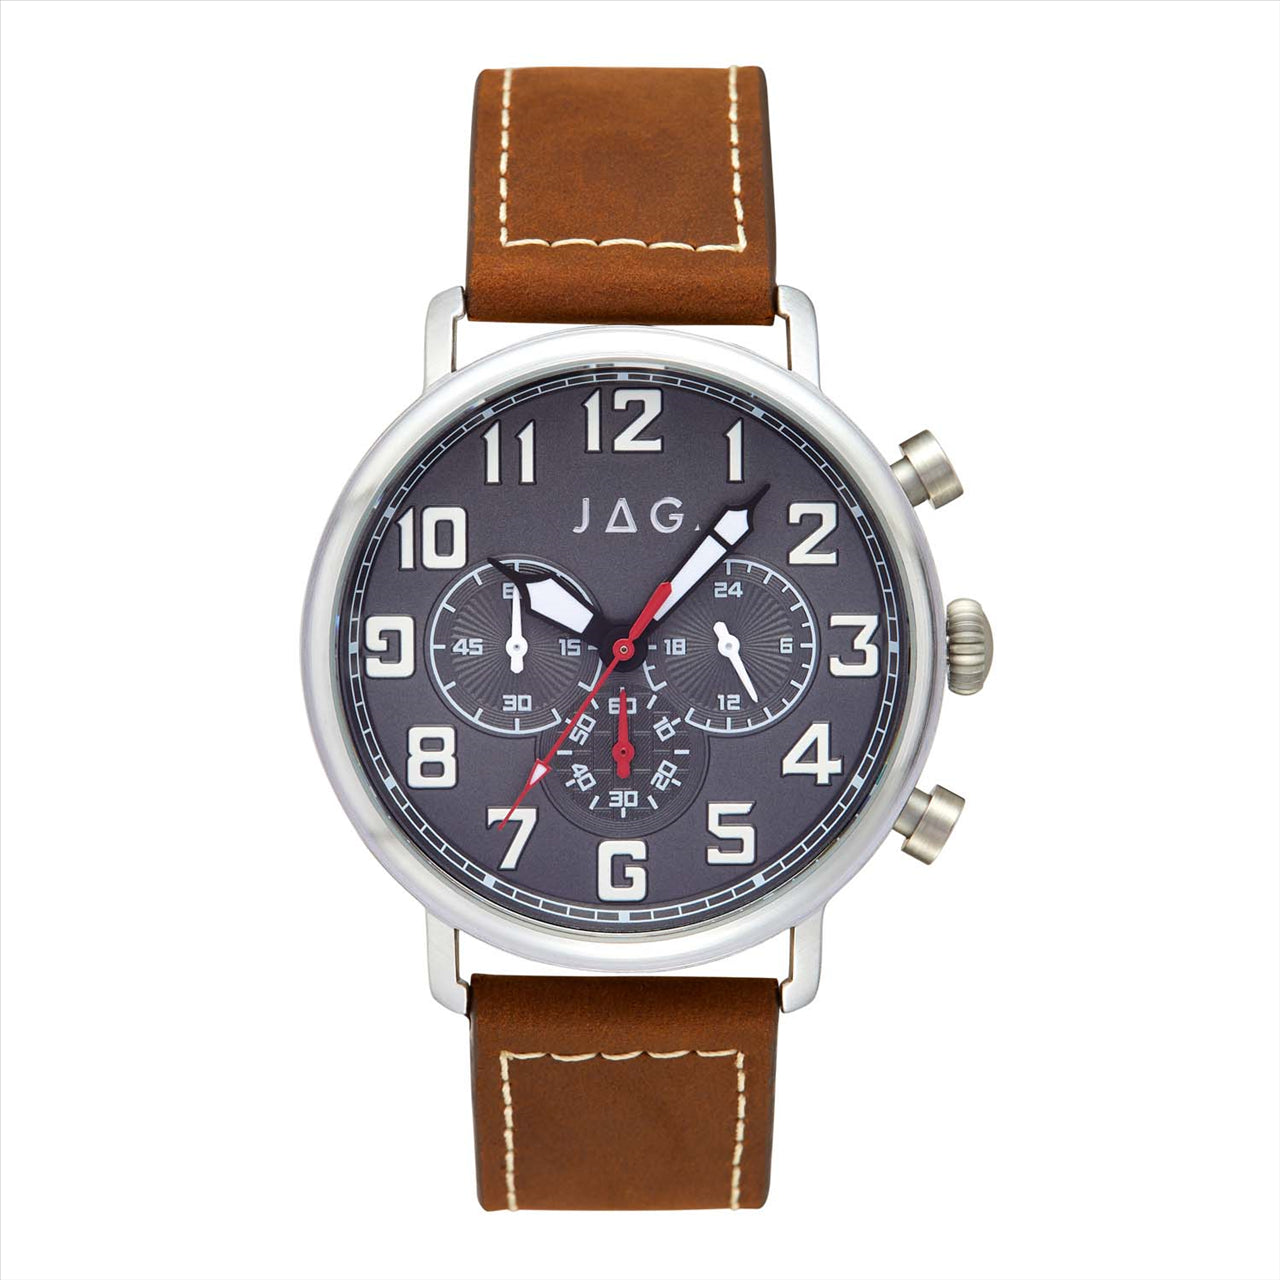 Gents Stainless Steel JAG Watch with Leather Strap